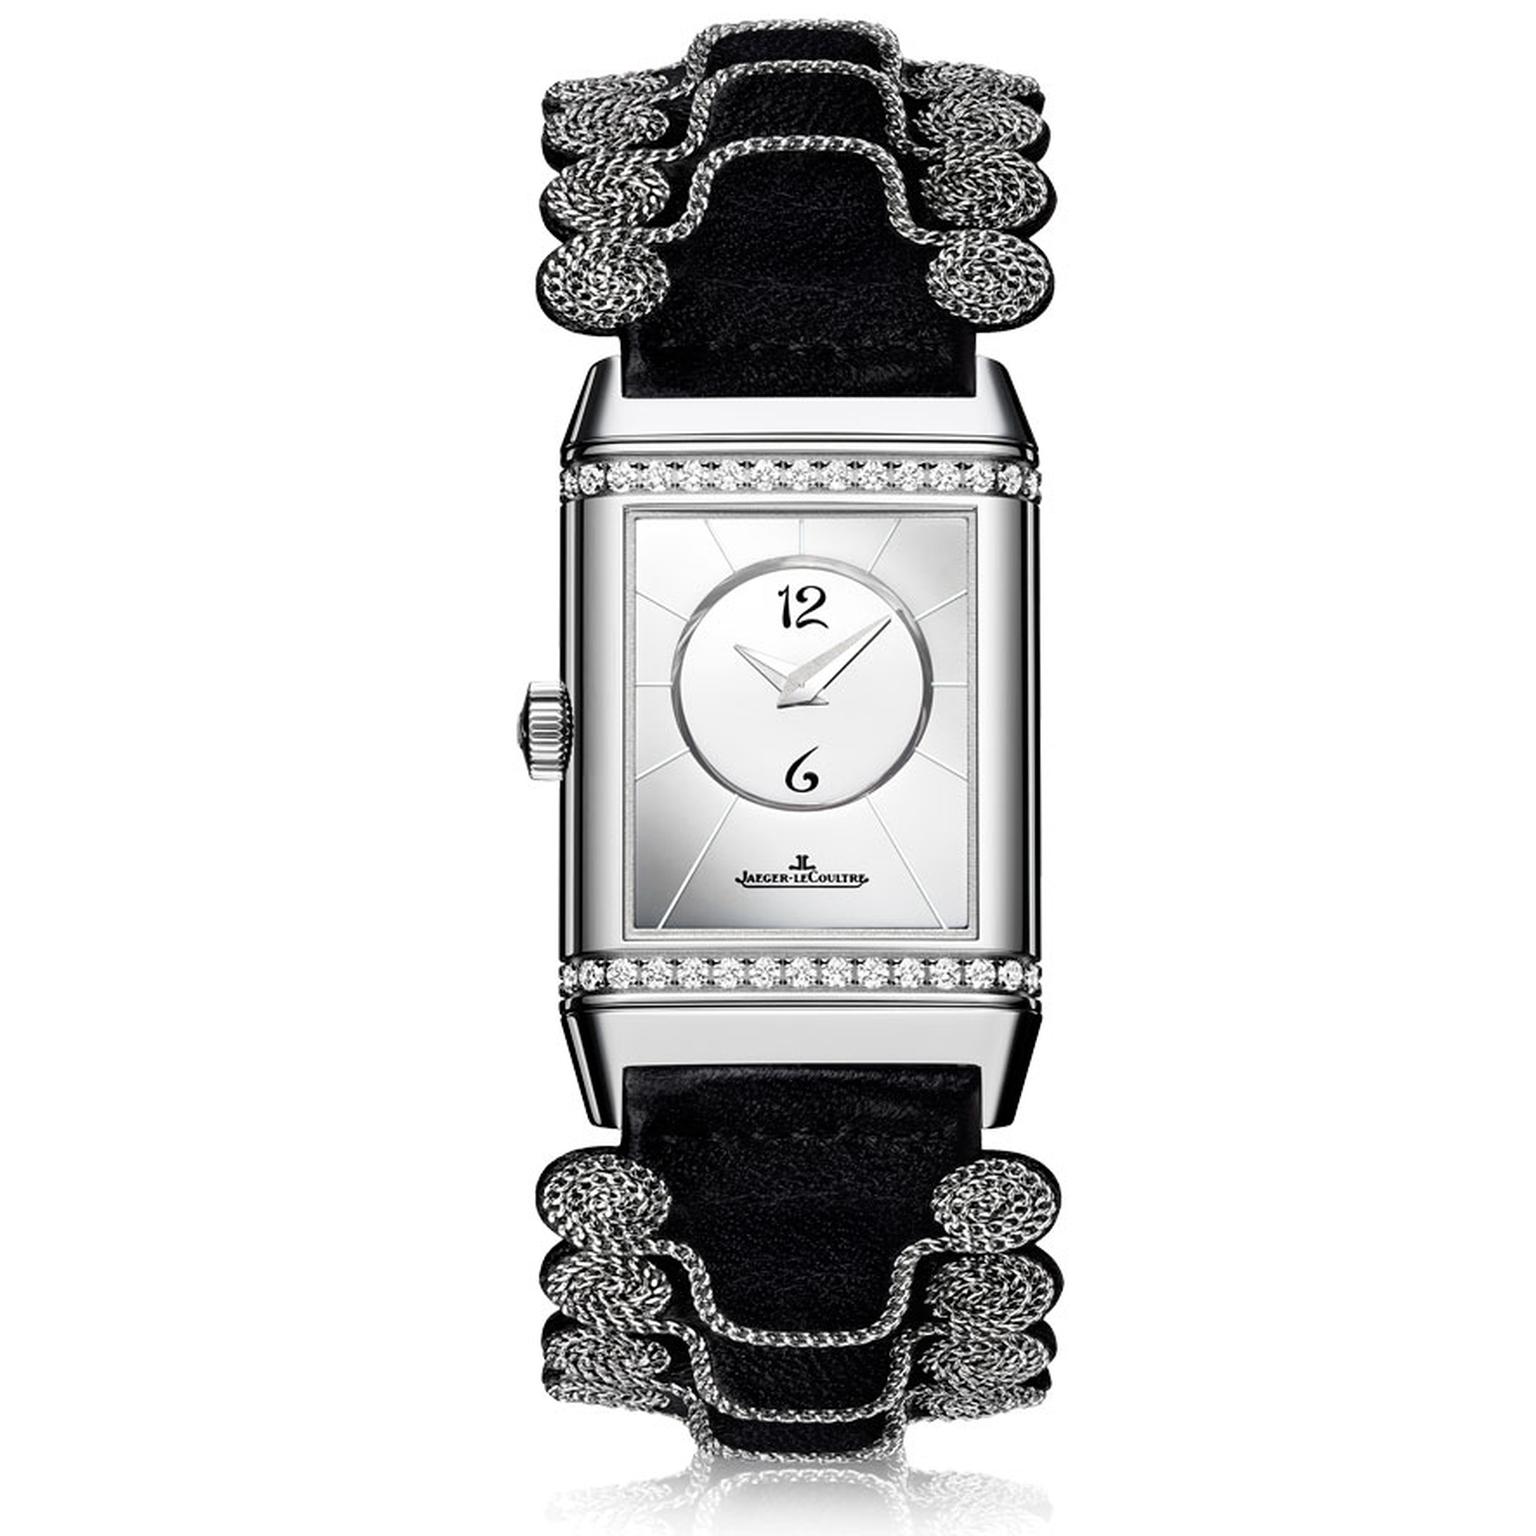 Jaeger-LeCoultre Reverso Duetto Louboutin Officer strap black